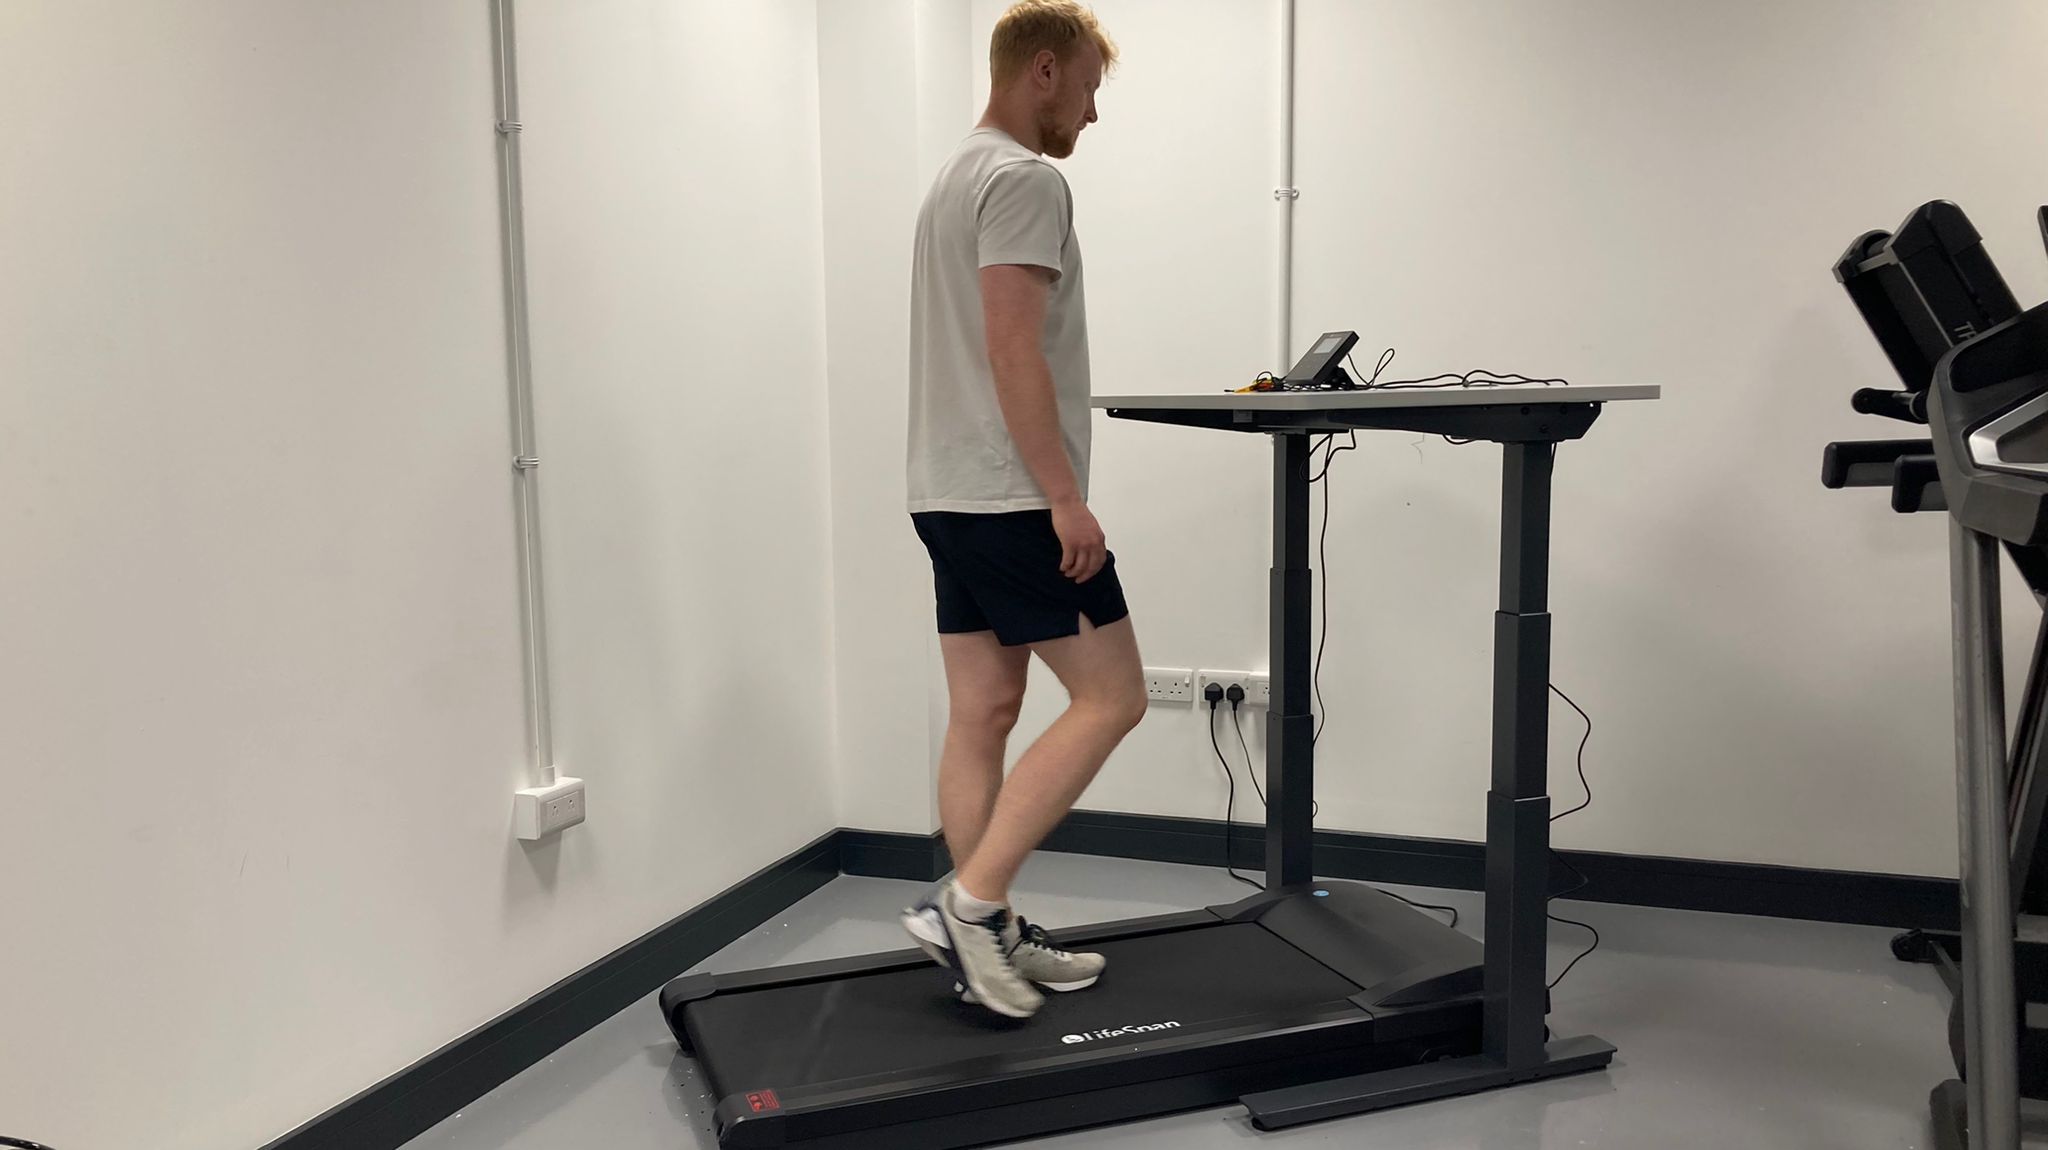 LiveScience fitness writer, Harry Bullmore, tests out the The Lifespan TR5000-DT7+